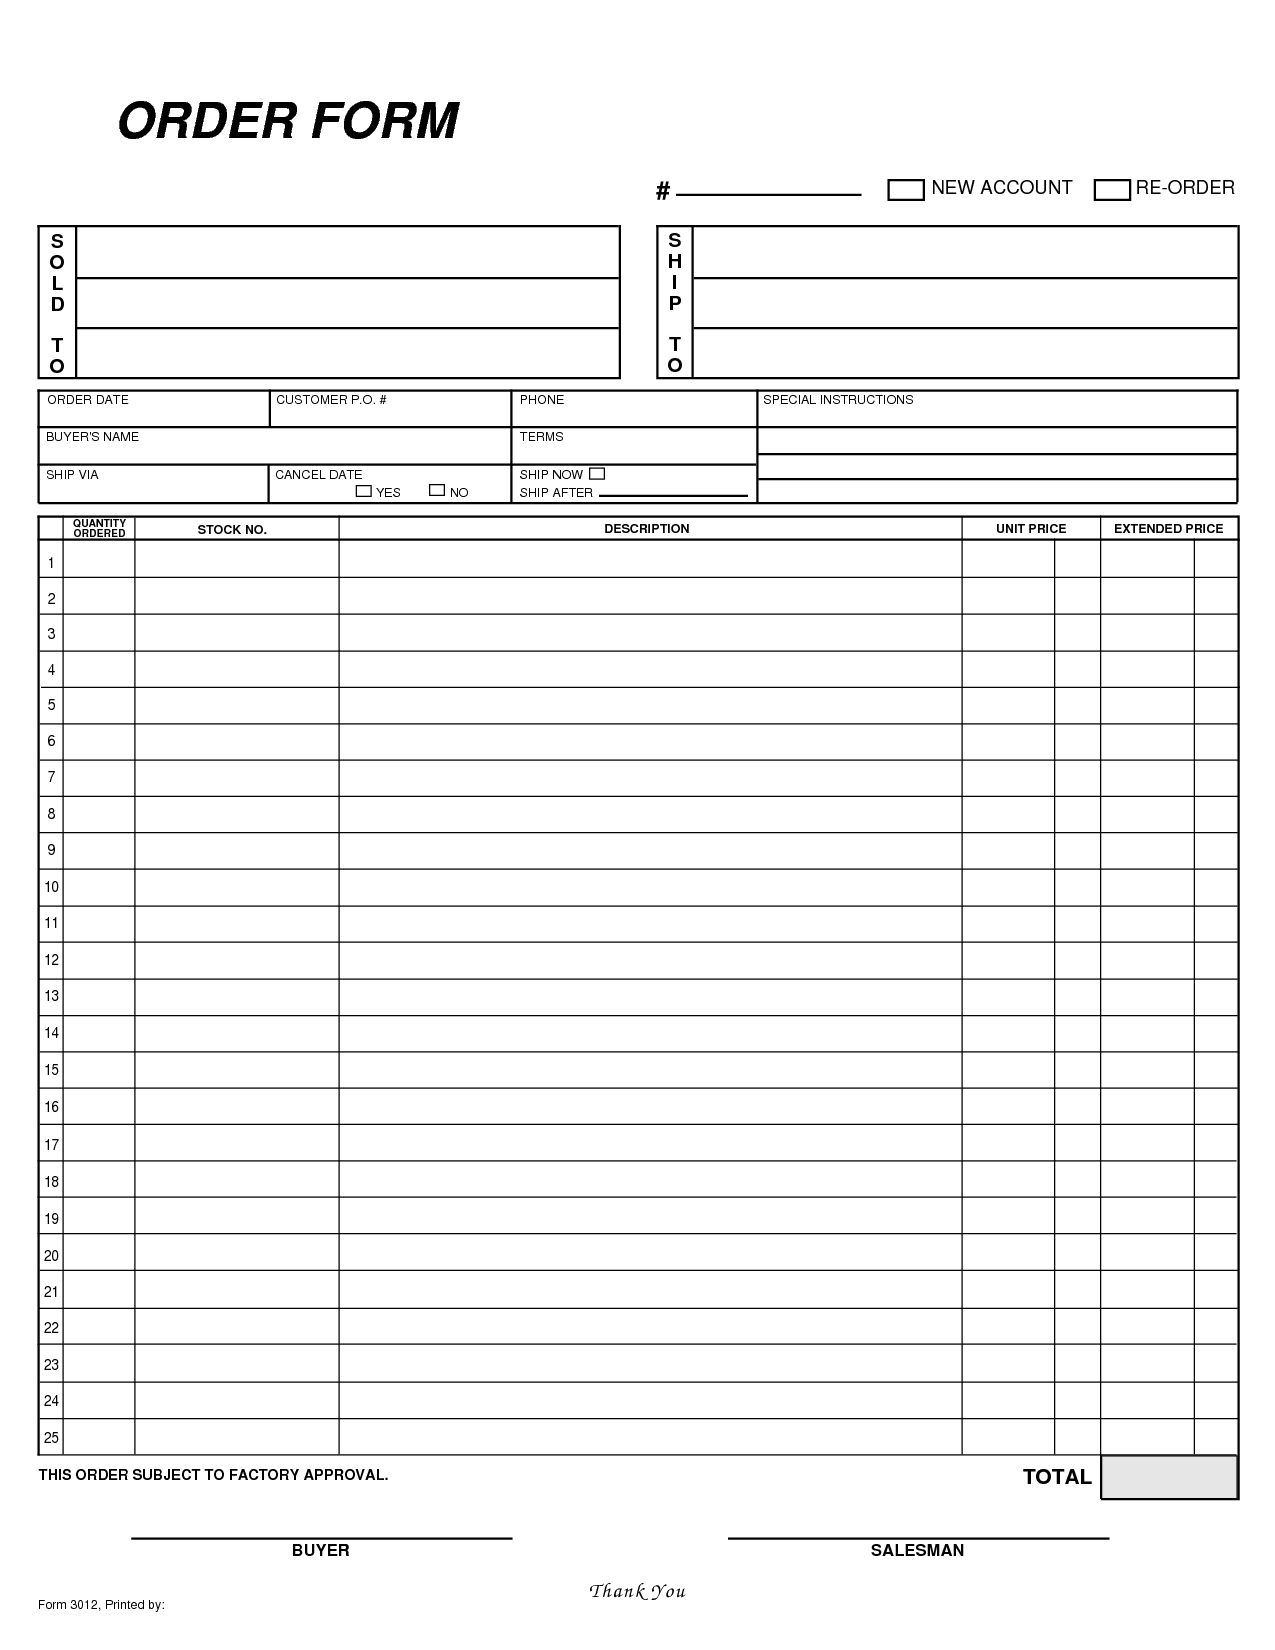 Free Blank Order Form Template | Yummy | Order form template 